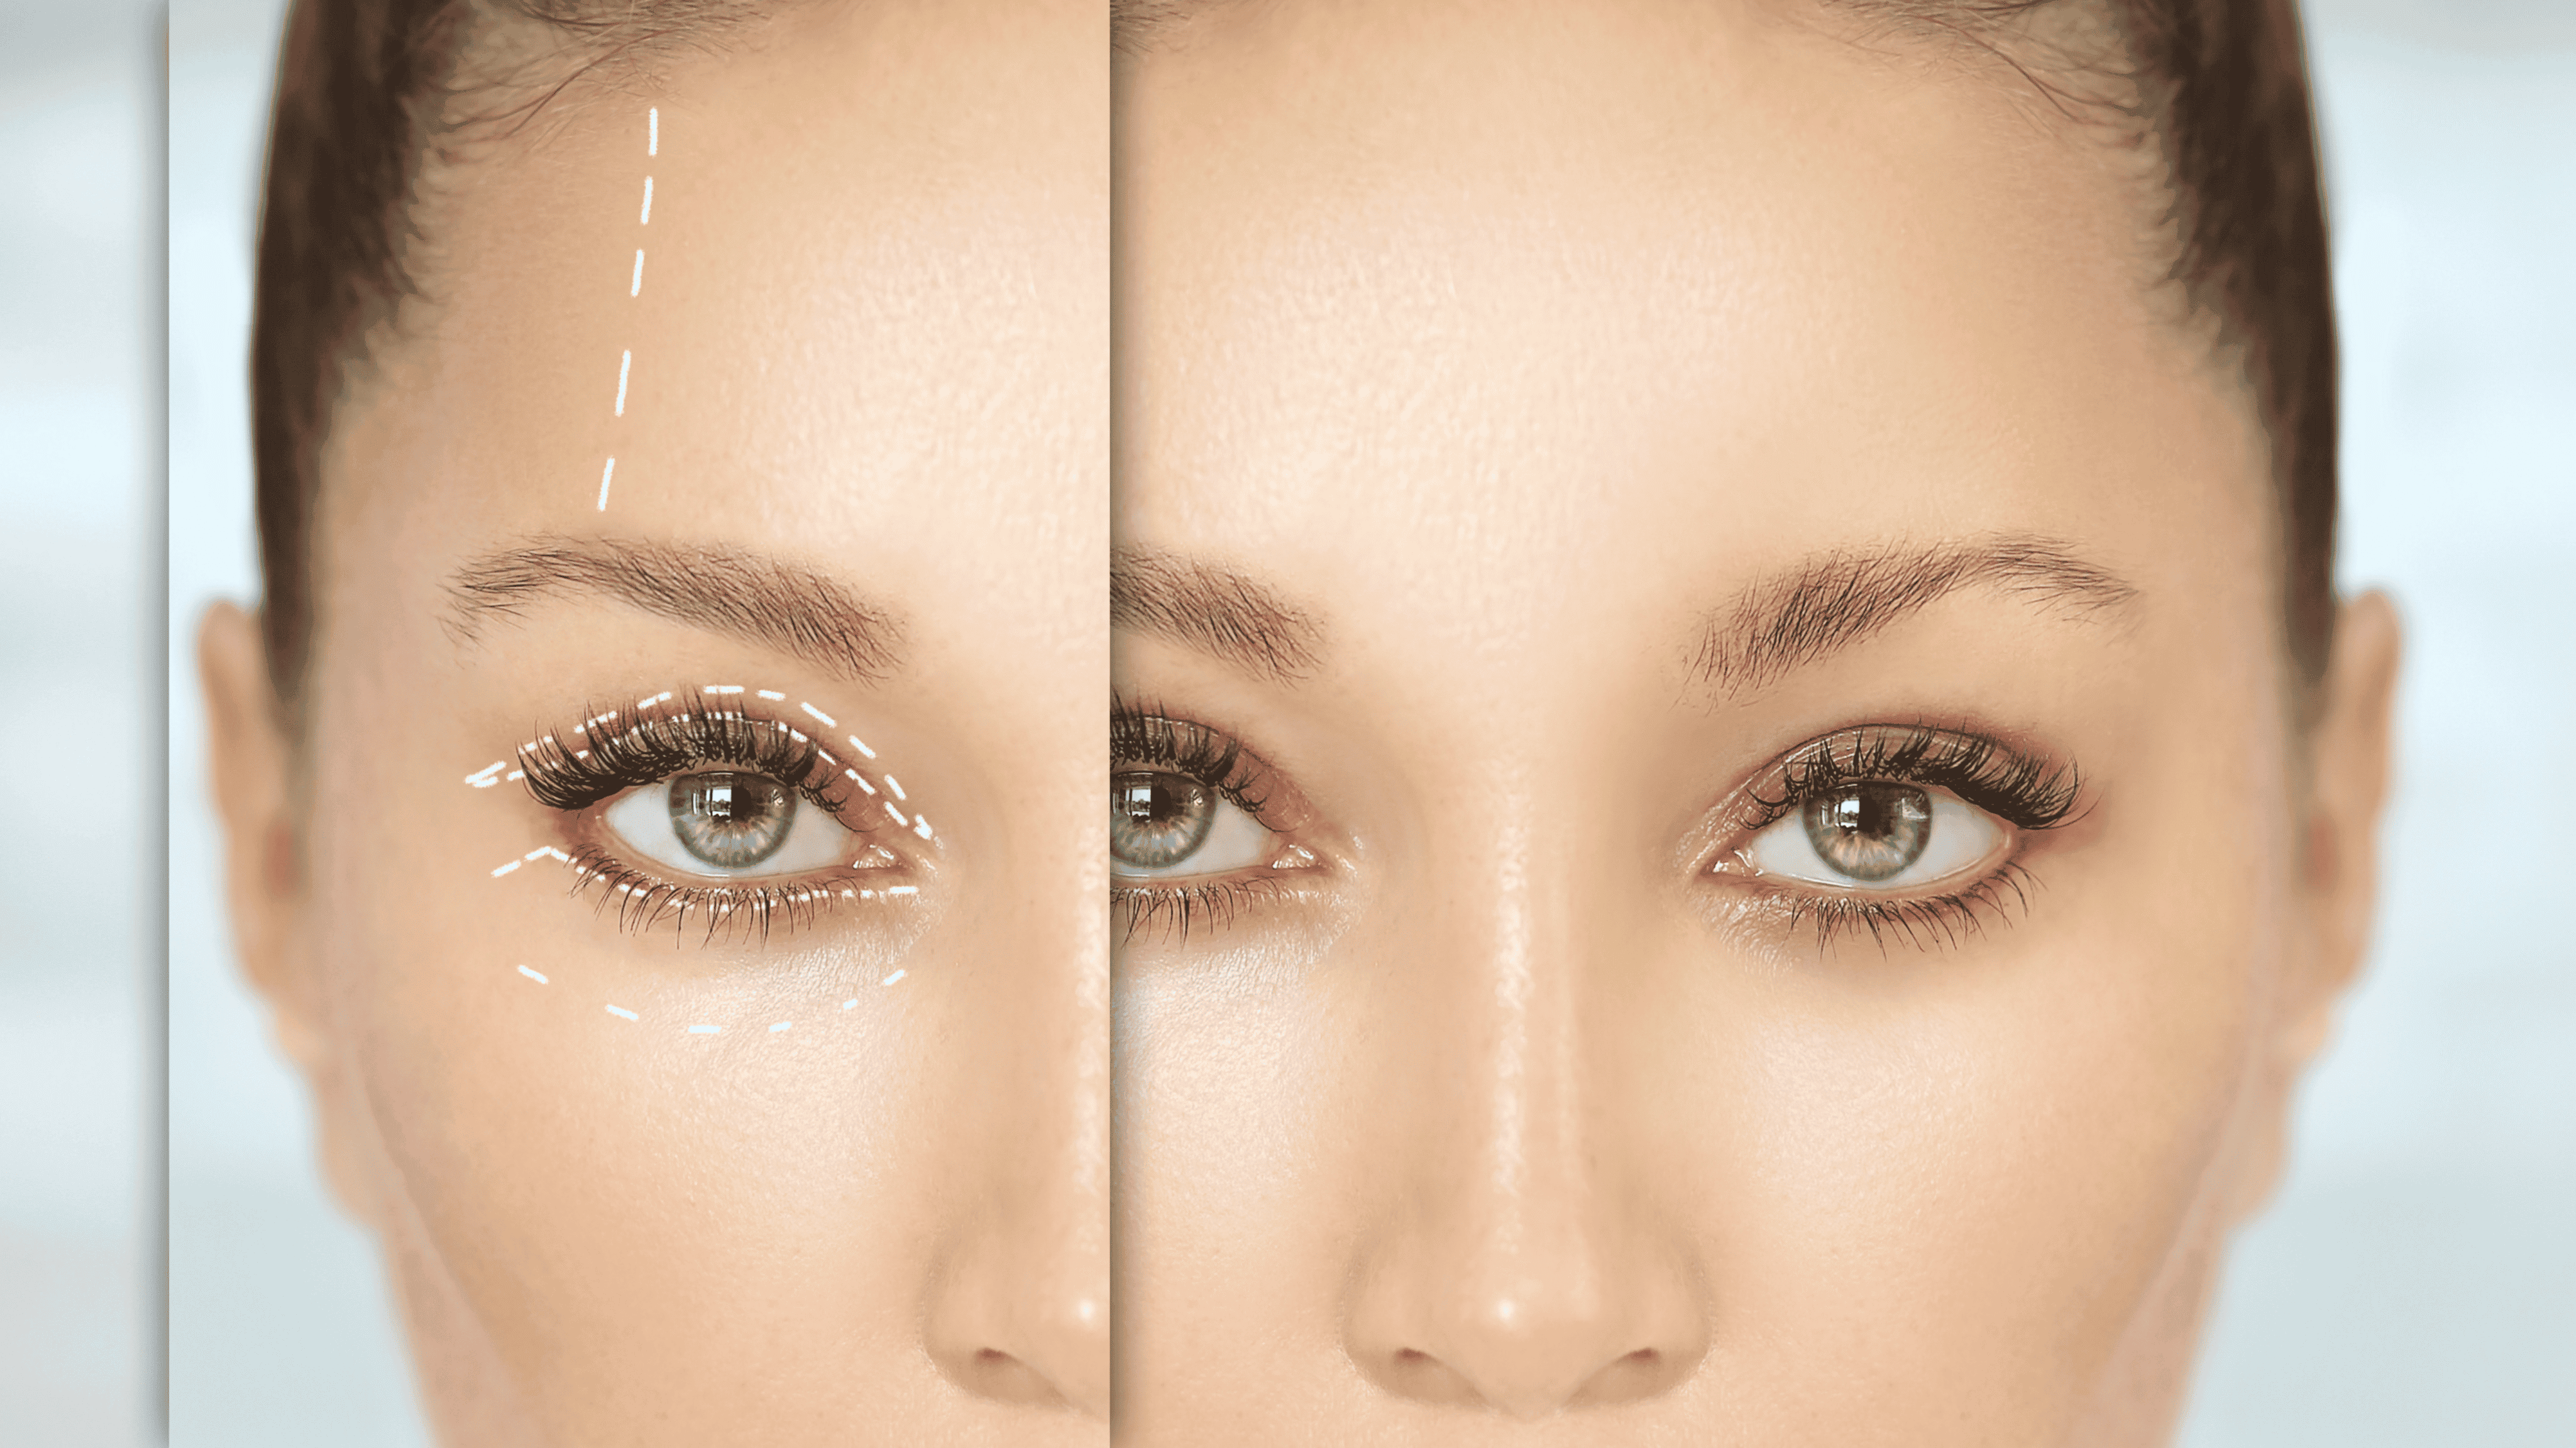 The facts about eyelid surgery